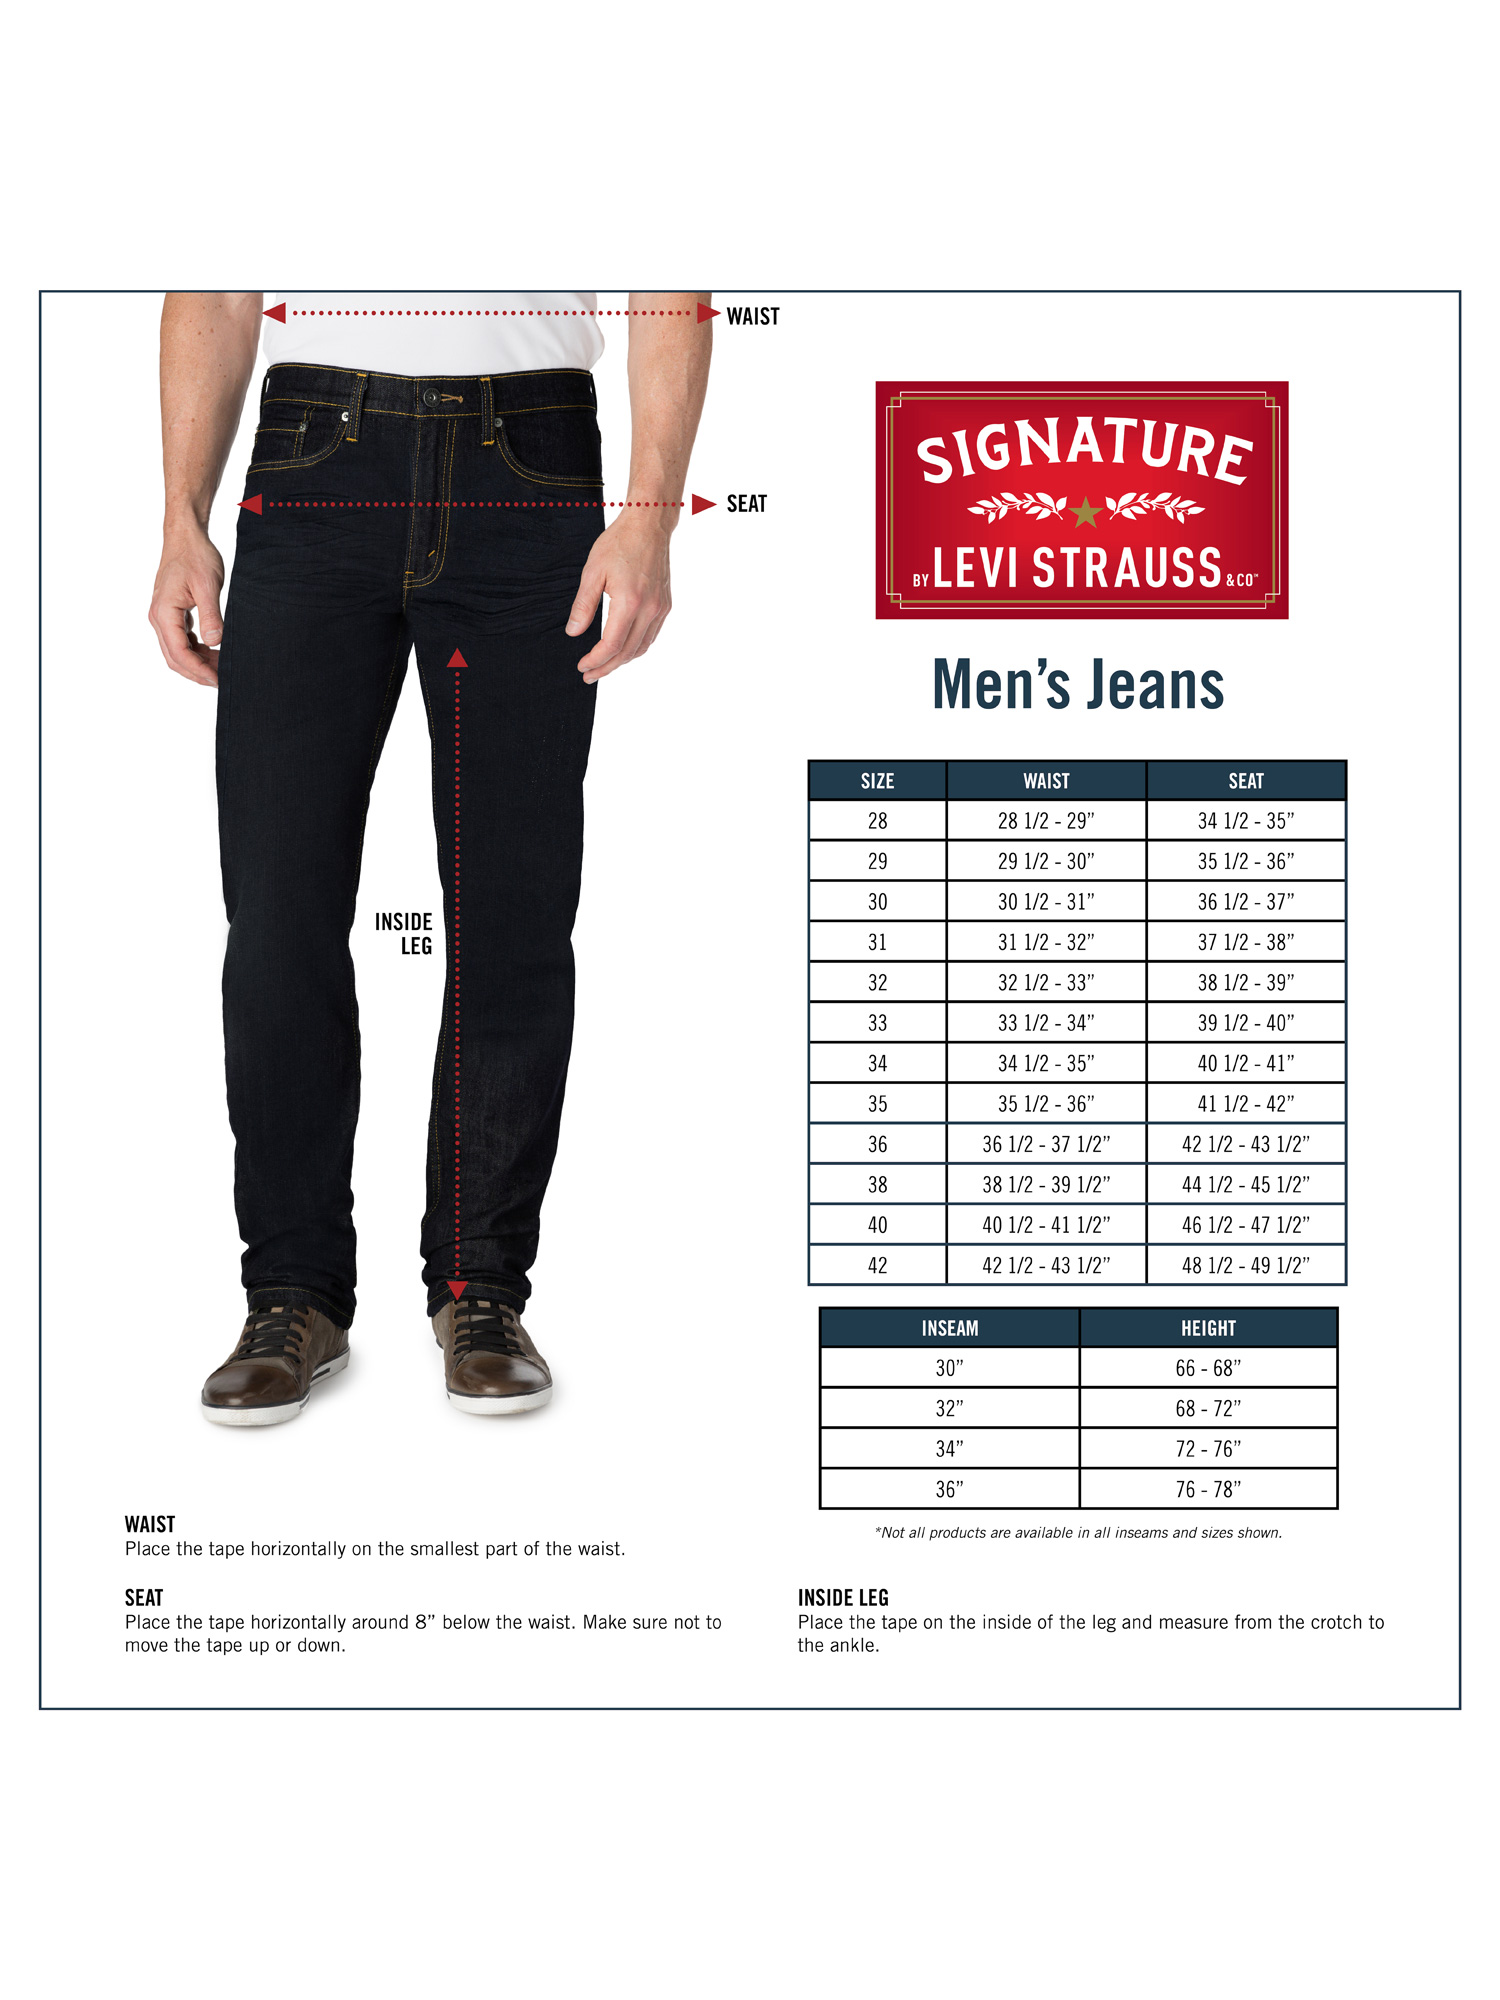 Signature by Levi Strauss & Co. Men's Skinny Jeans - image 2 of 2